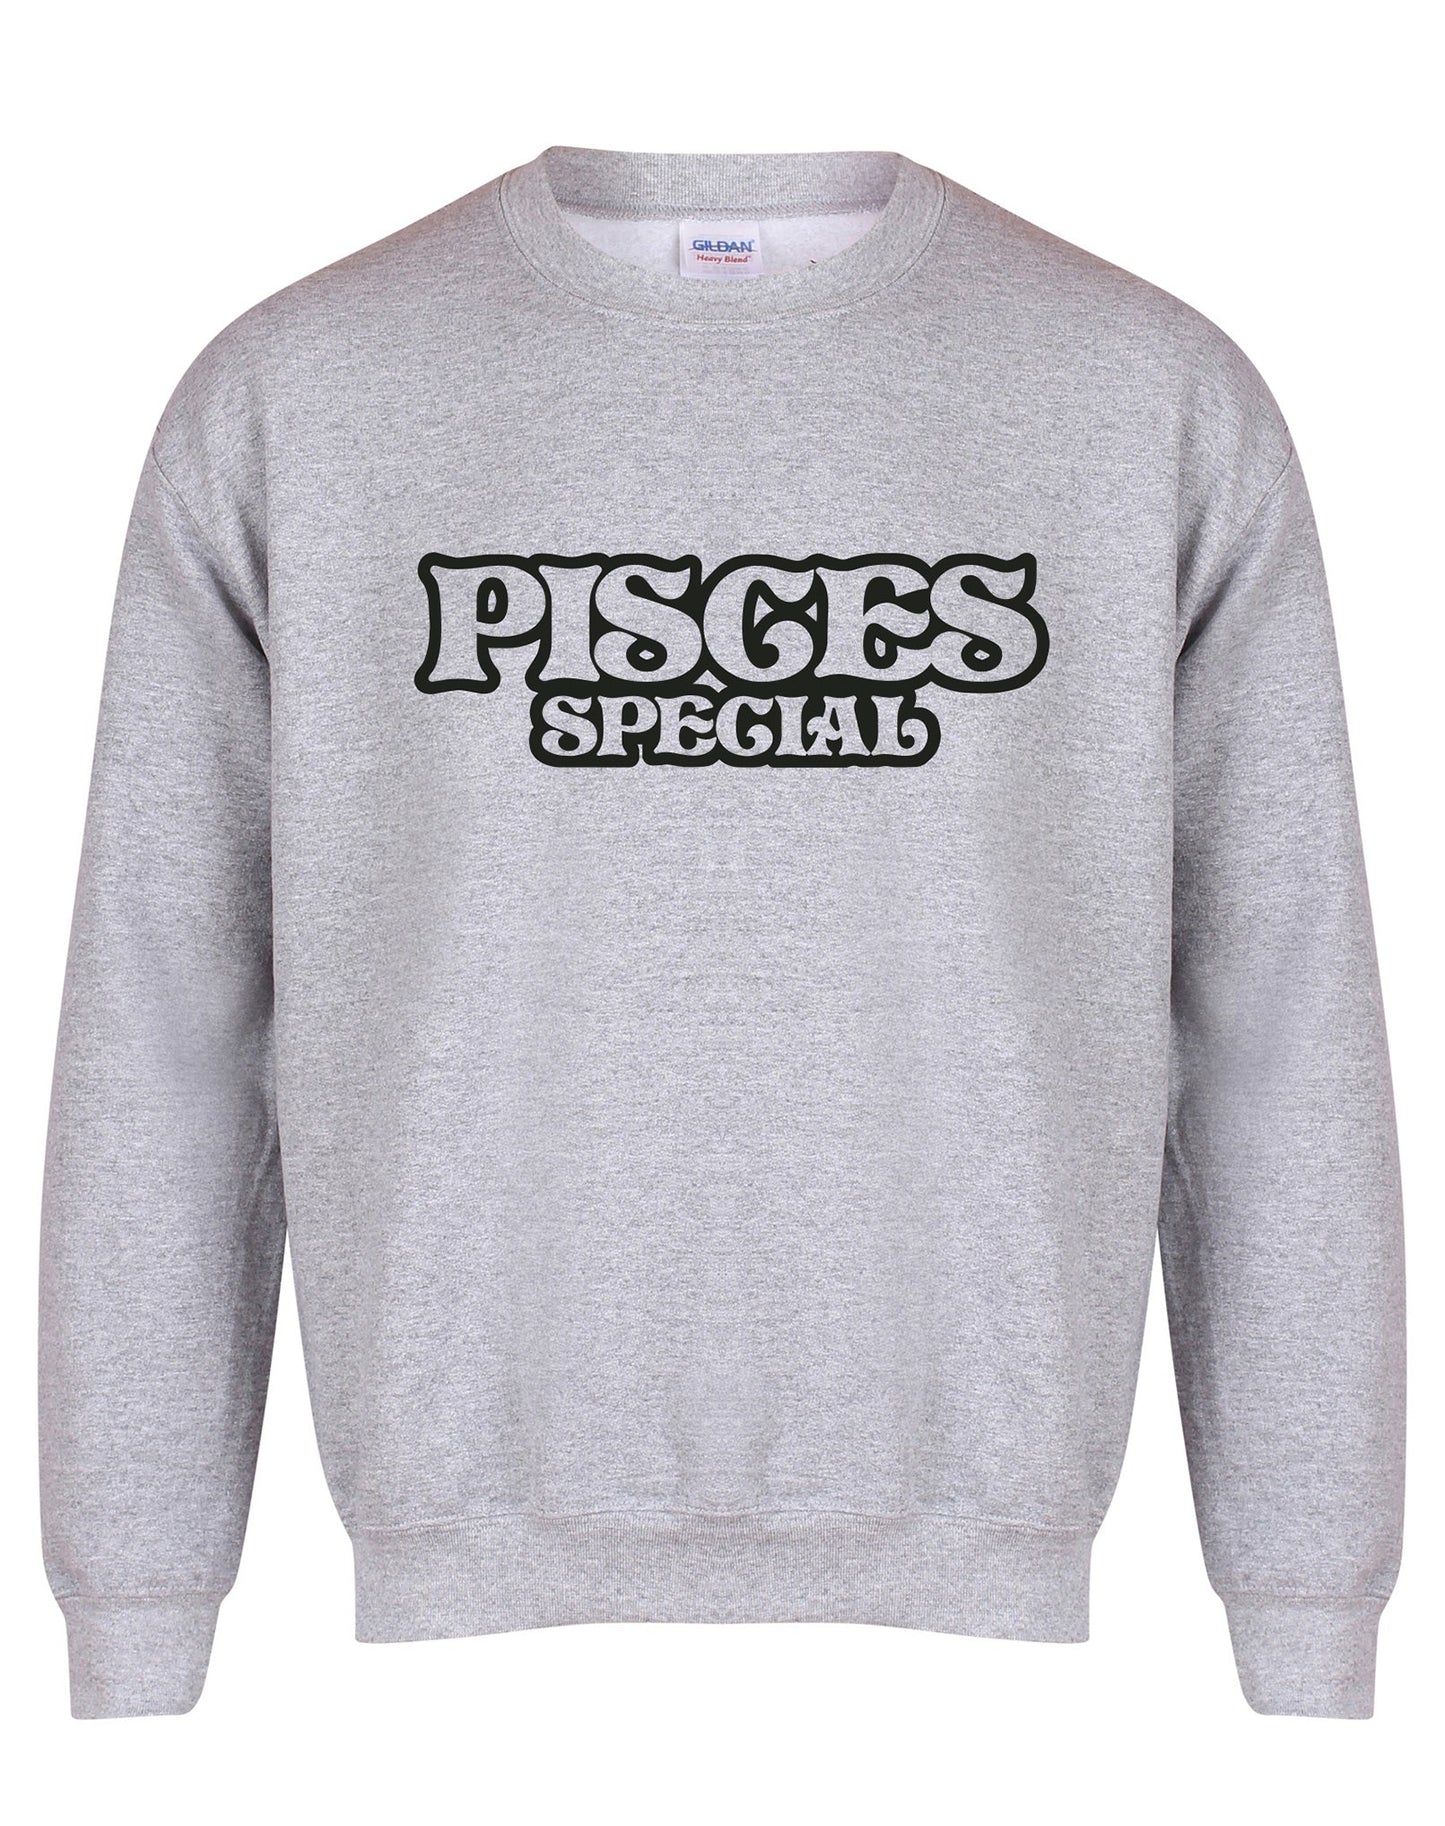 Pisces Special unisex fit sweatshirt - various colours - Dirty Stop Outs